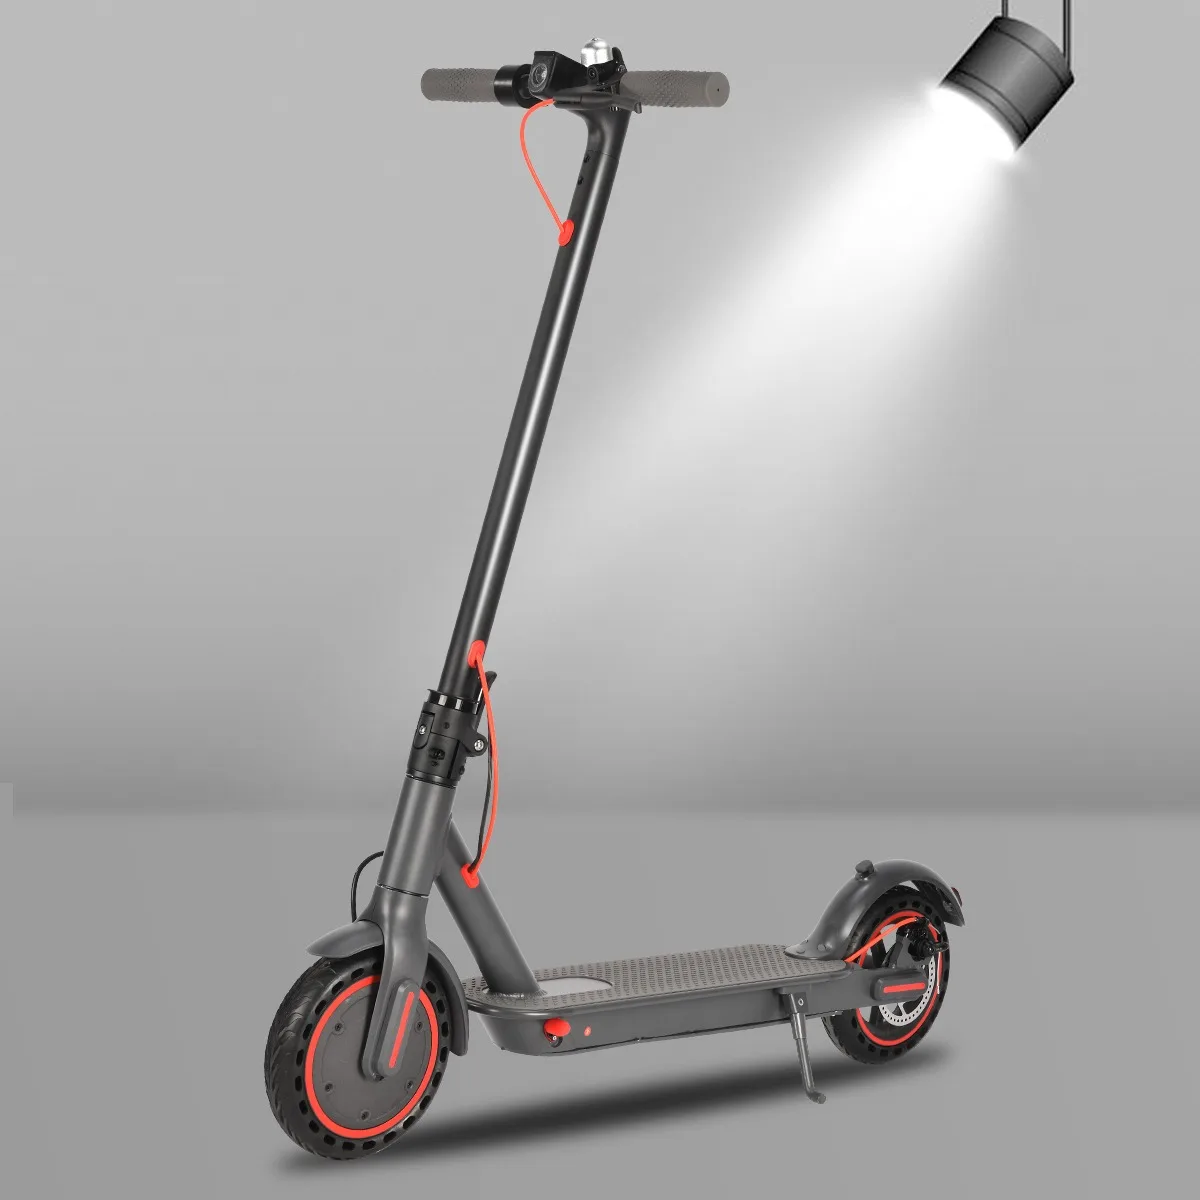 Free Shipping Electric Scooter 350W/500W 10.4Ah/12.5Ah Scooter Electric EU UK Warehouse Electric Foldable Scooters For Adults